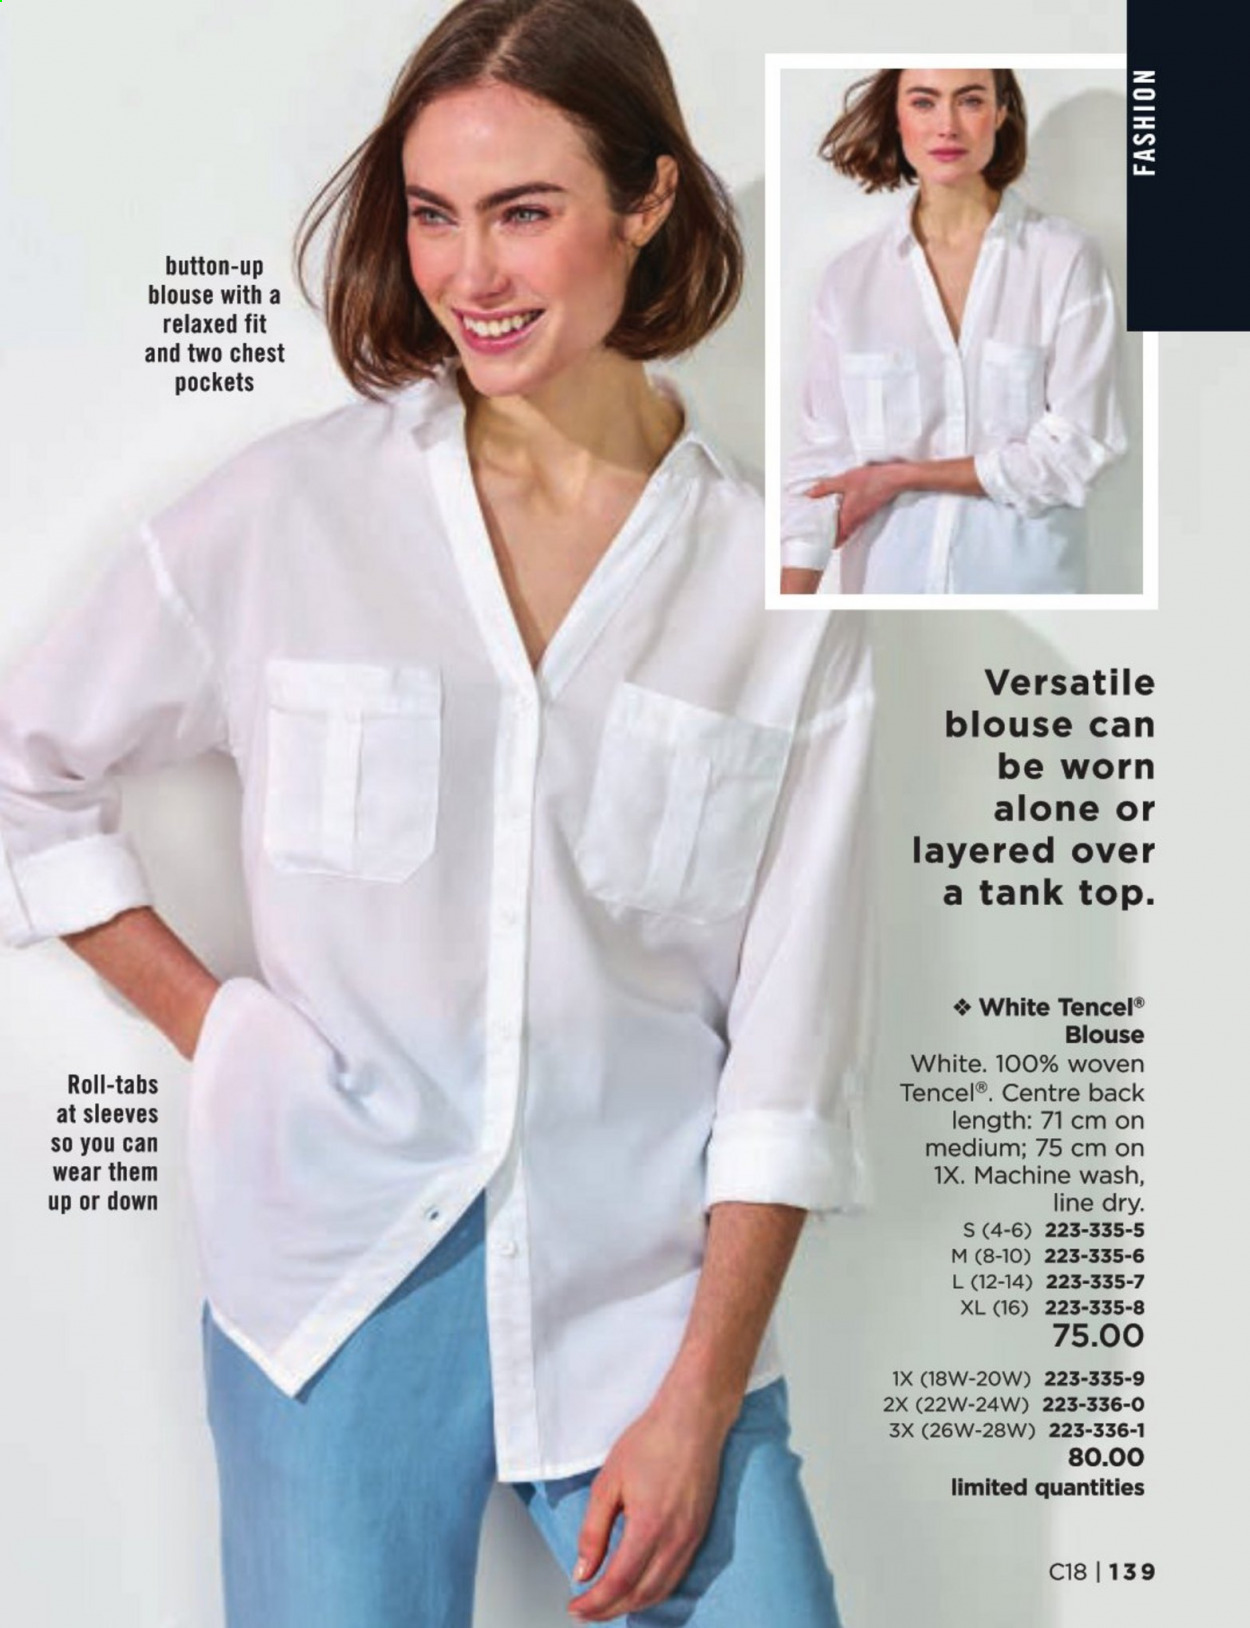 thumbnail - Avon Flyer - Sales products - blouse, tank top. Page 139.